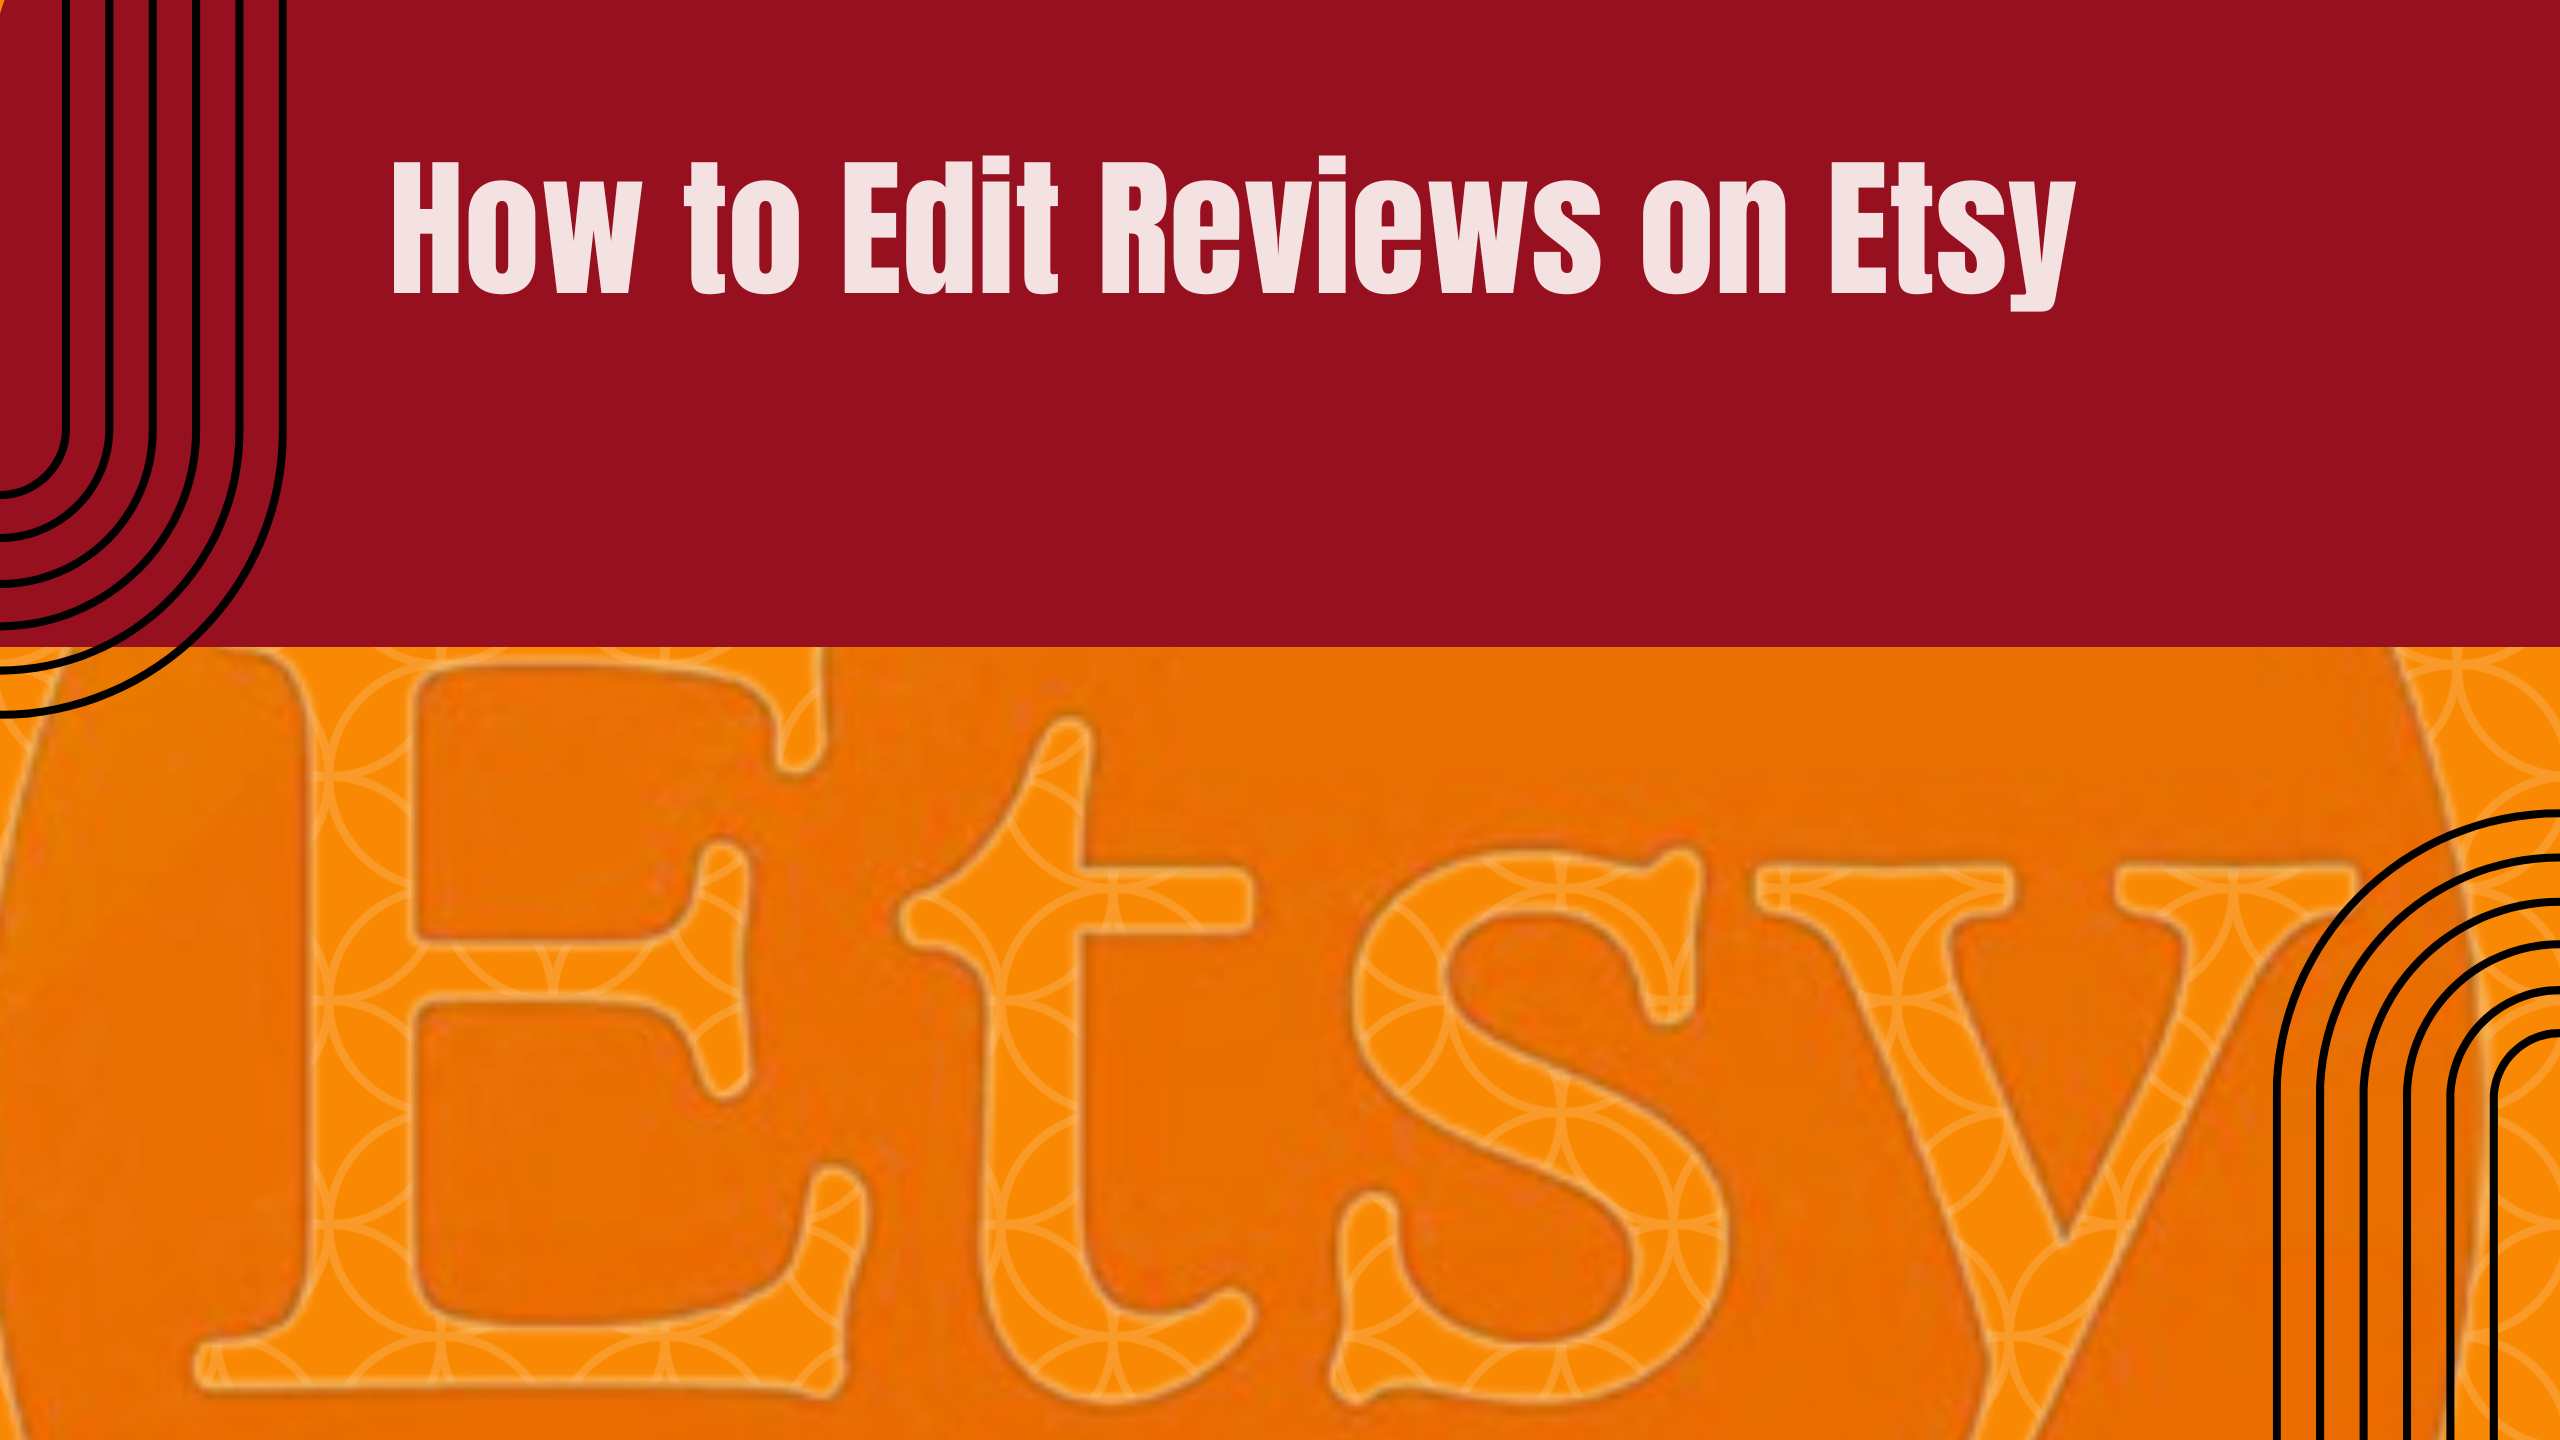 Updating Your Feedback: A Guide on How to Edit Reviews on Etsy